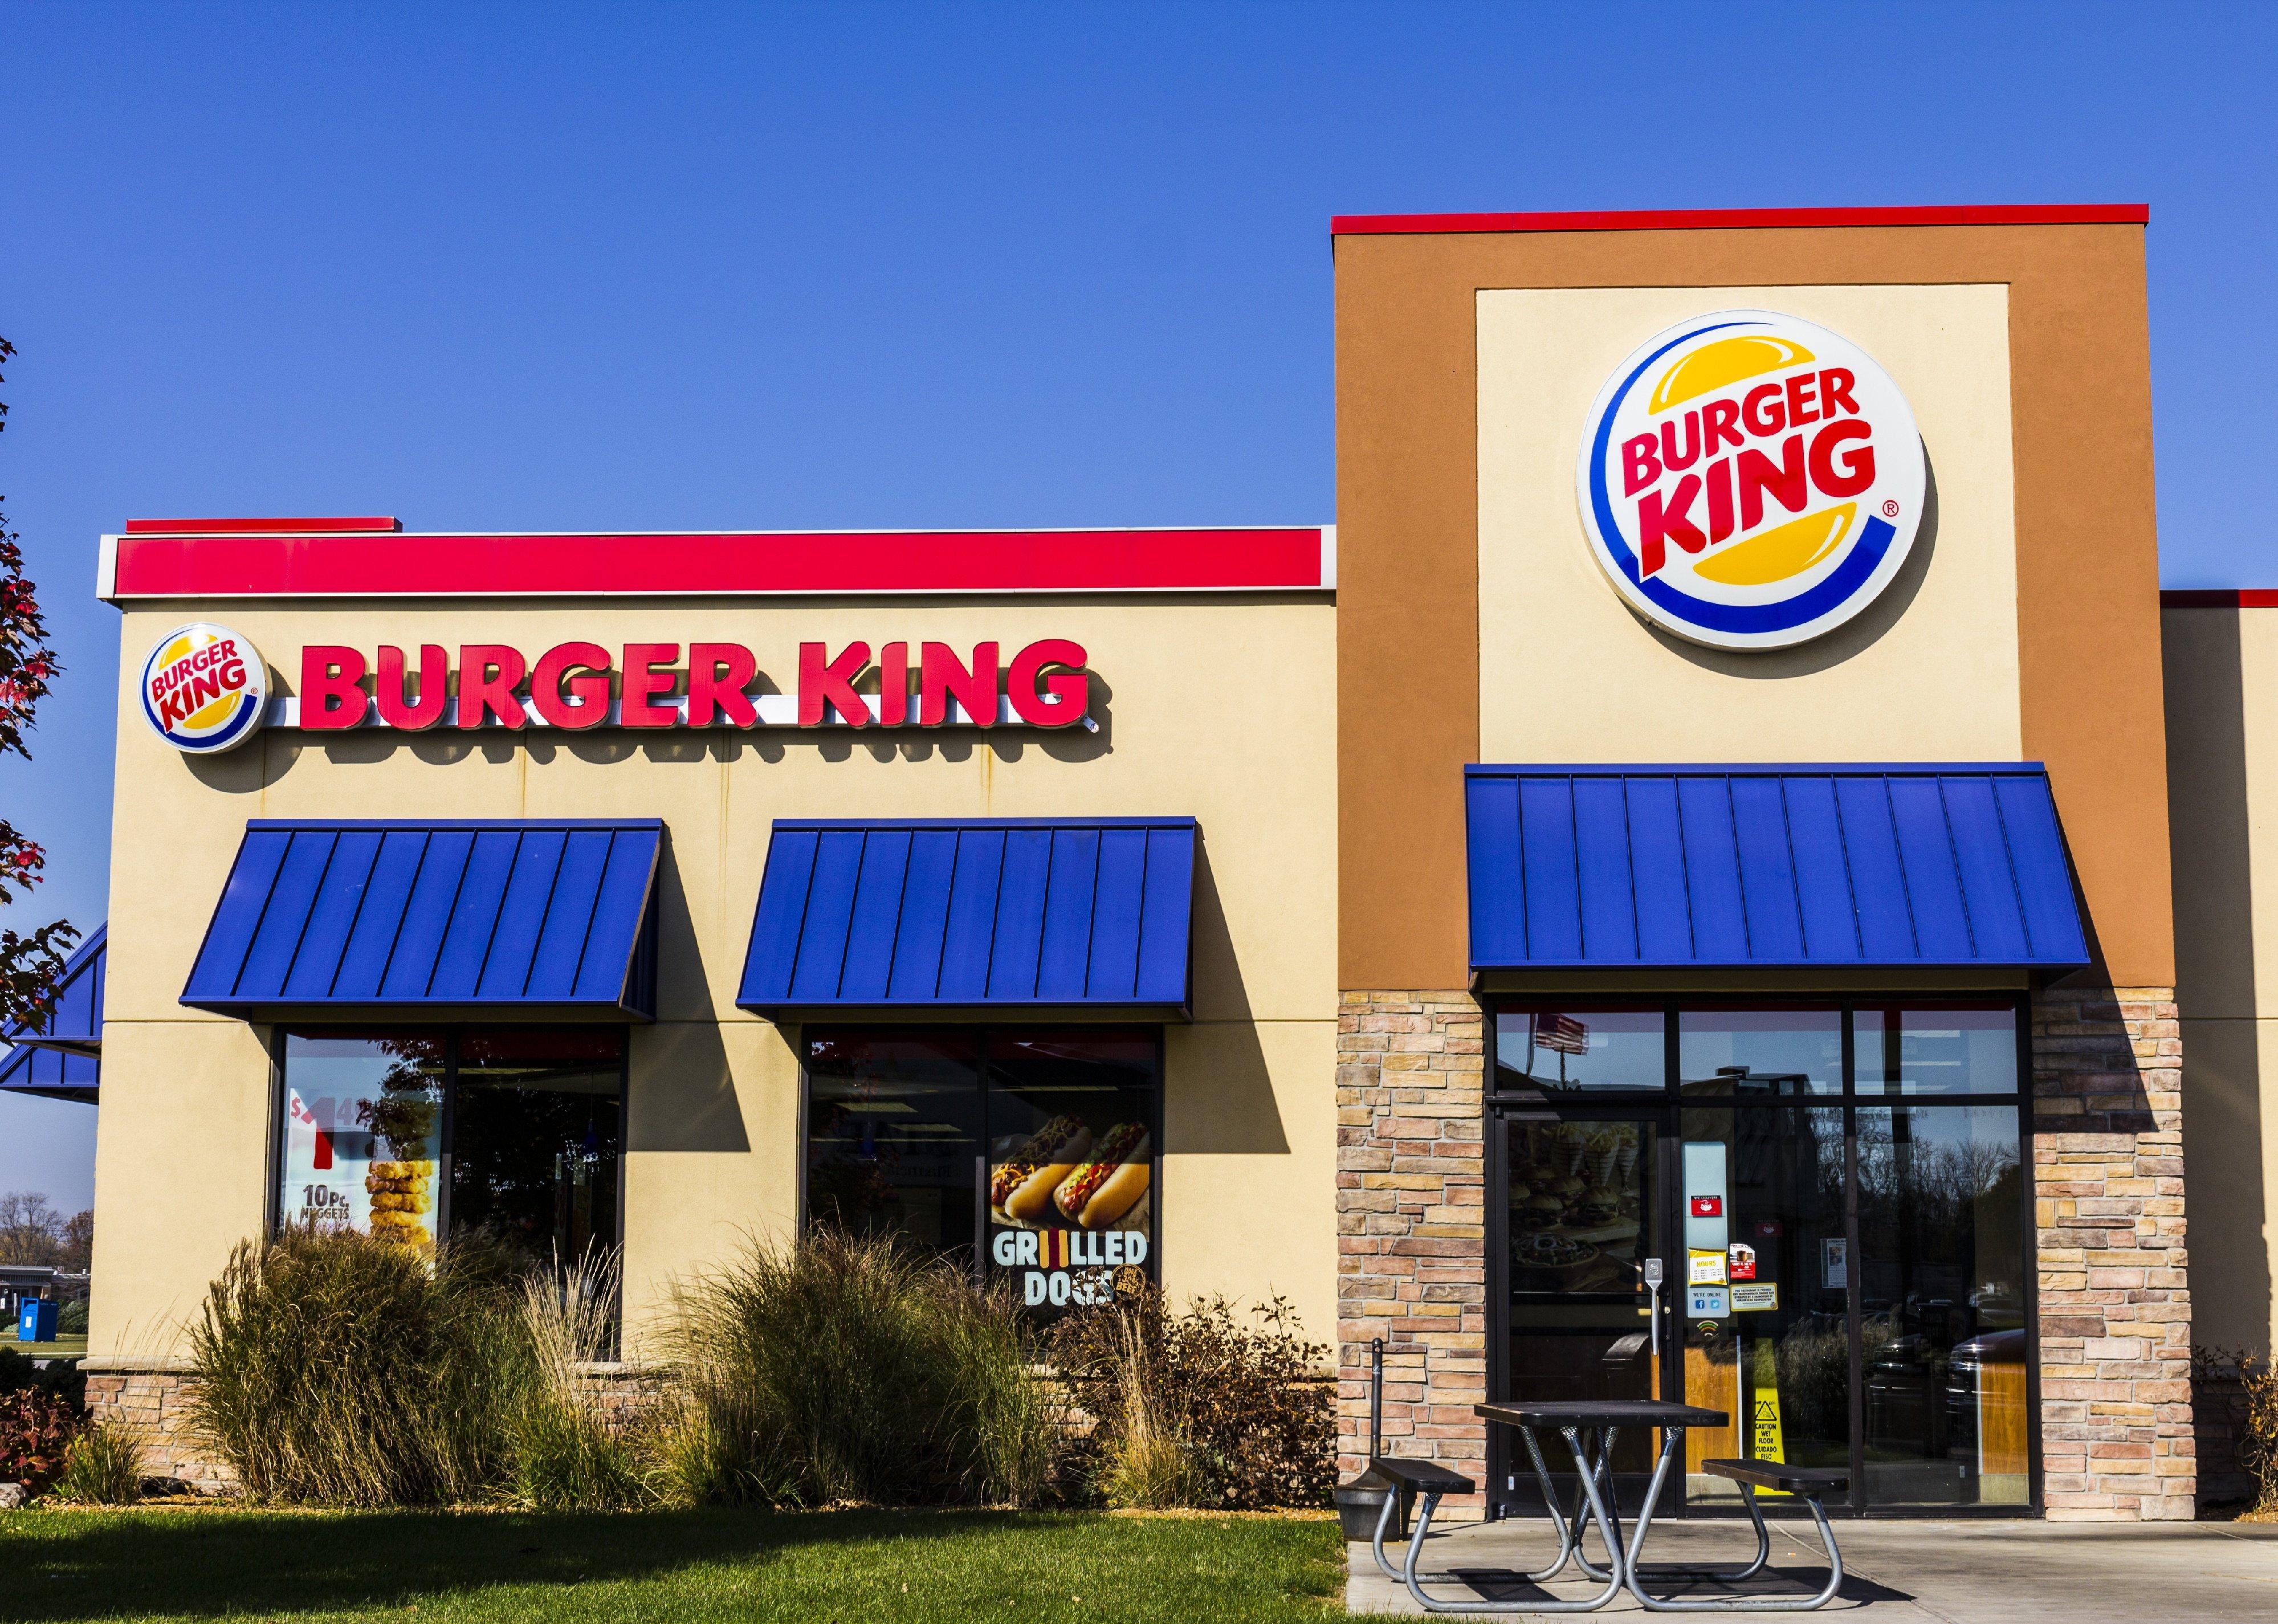 The most common California fast food restaurant isn't In-N-Out. These chains dominate